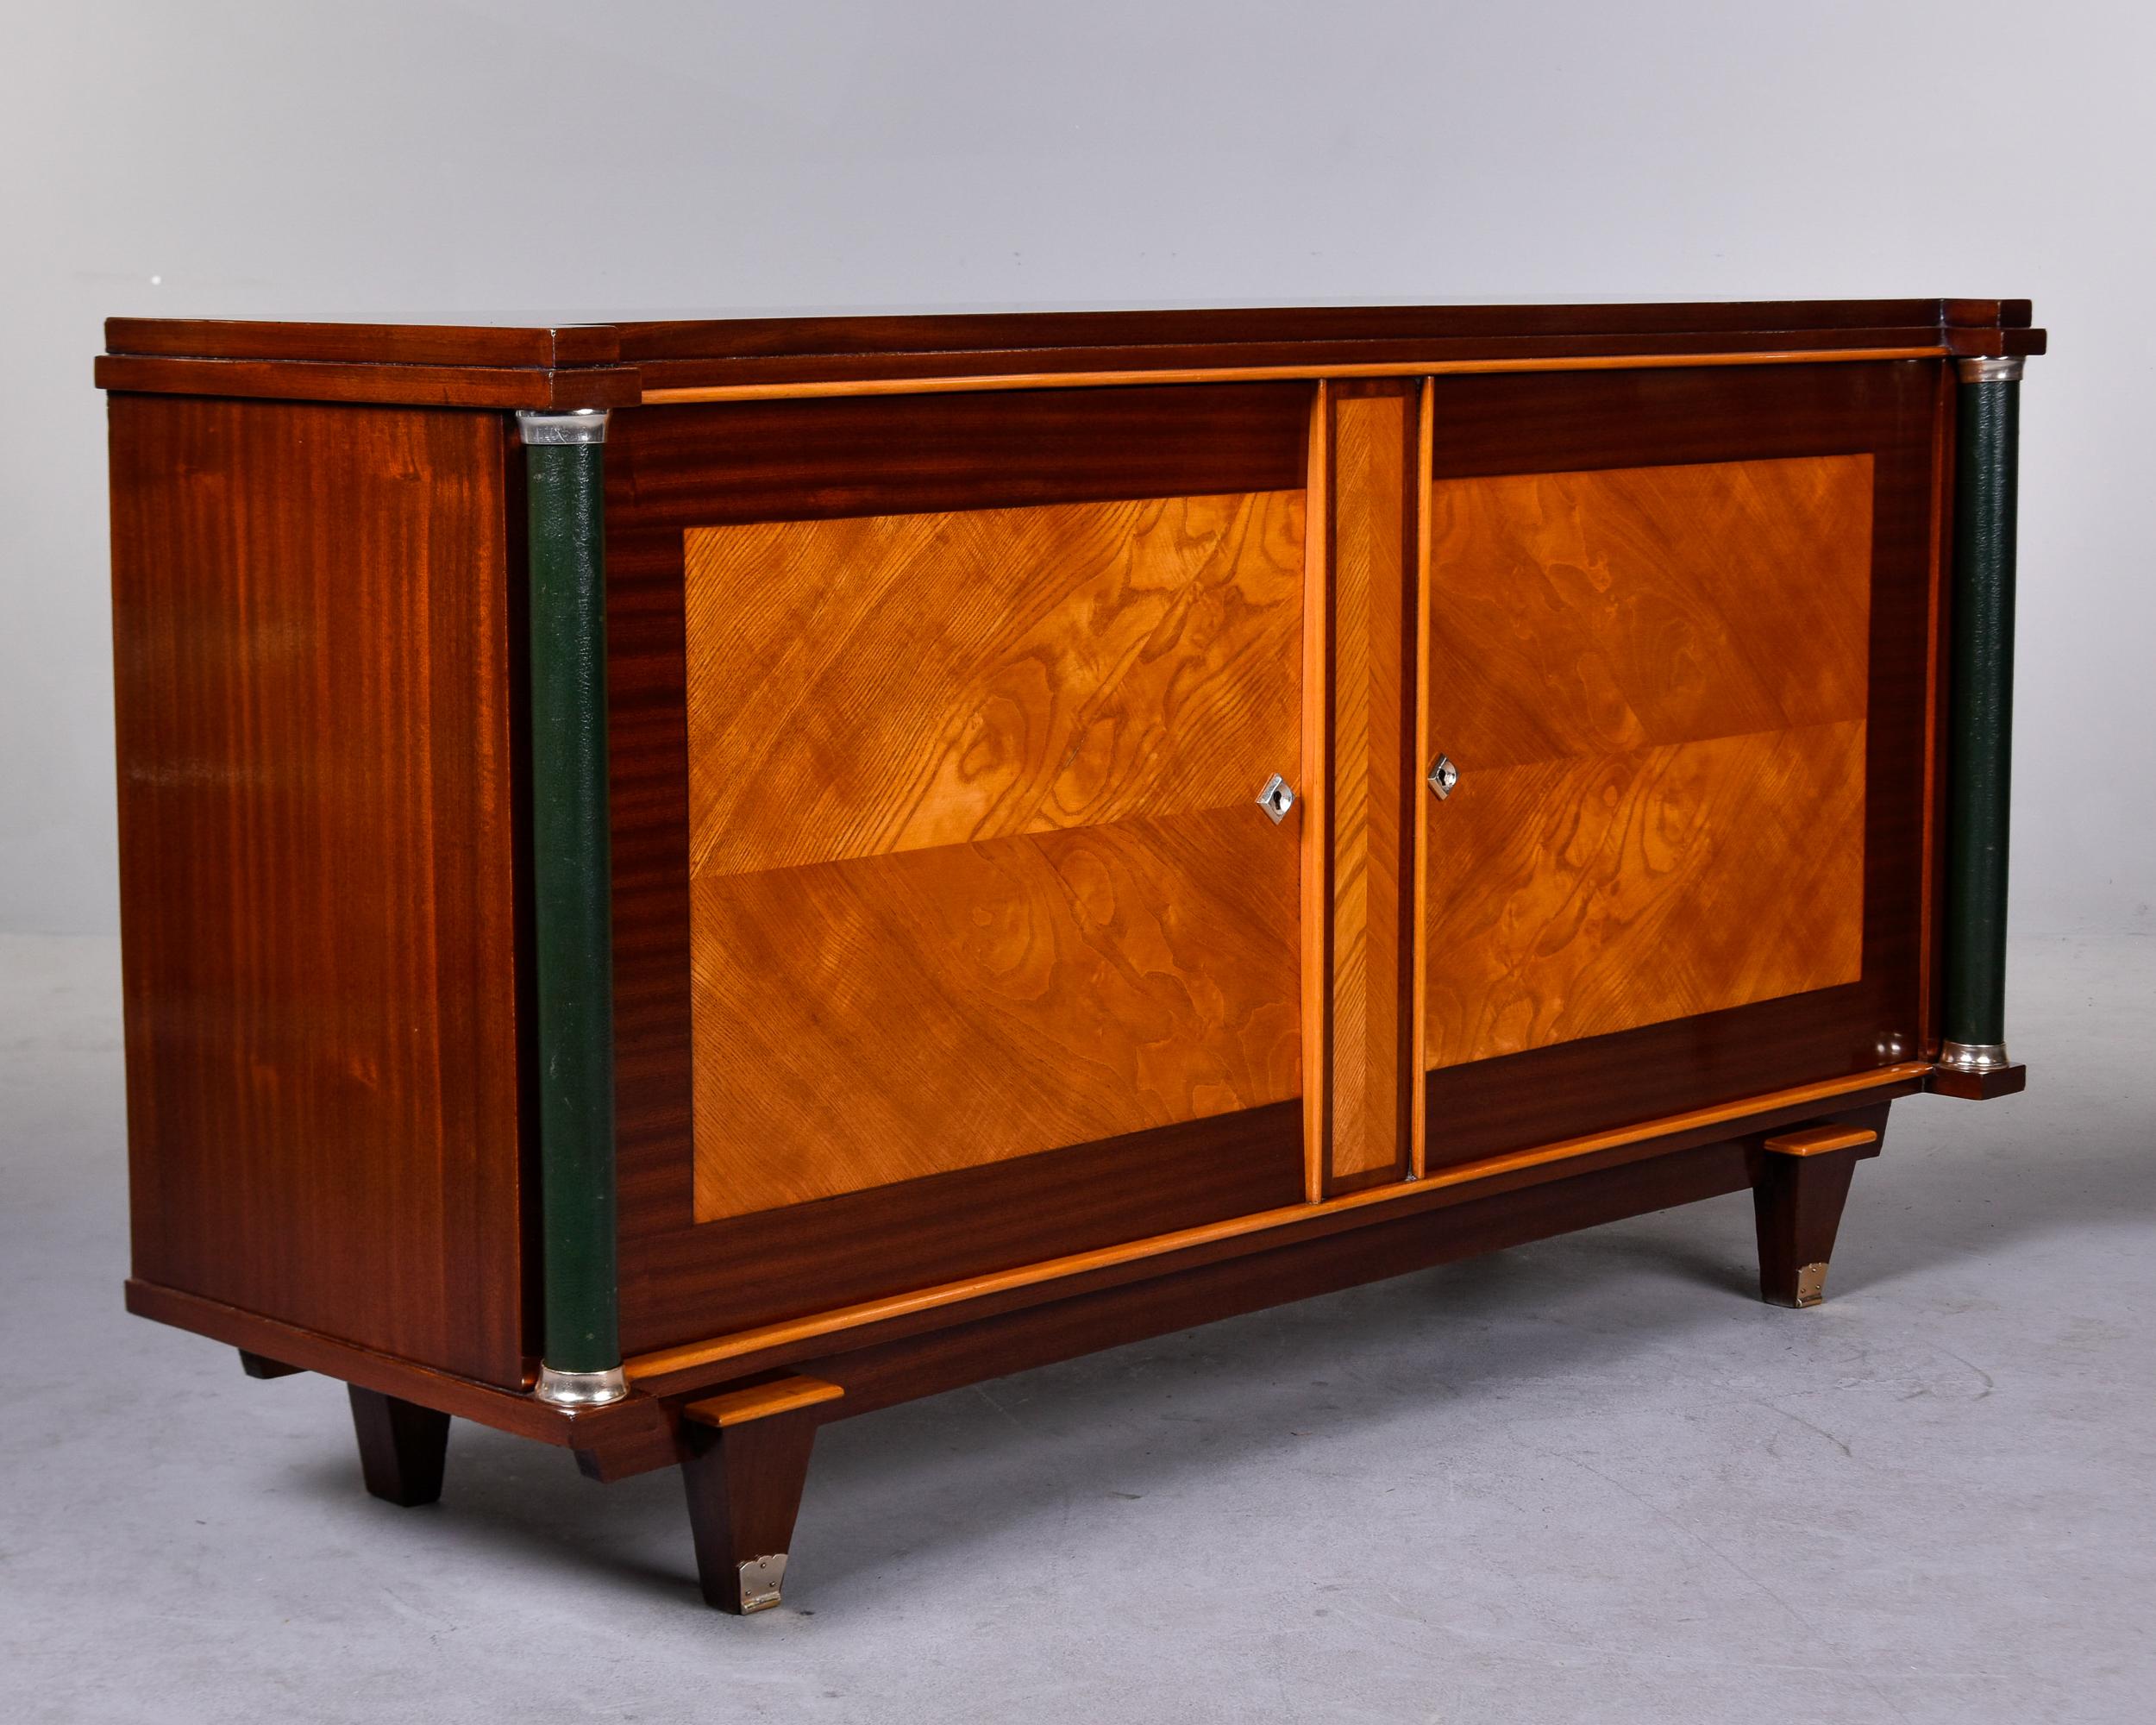 French Art Deco Polished Mahogany Cabinet with Leather Covered Pillar Detail 9